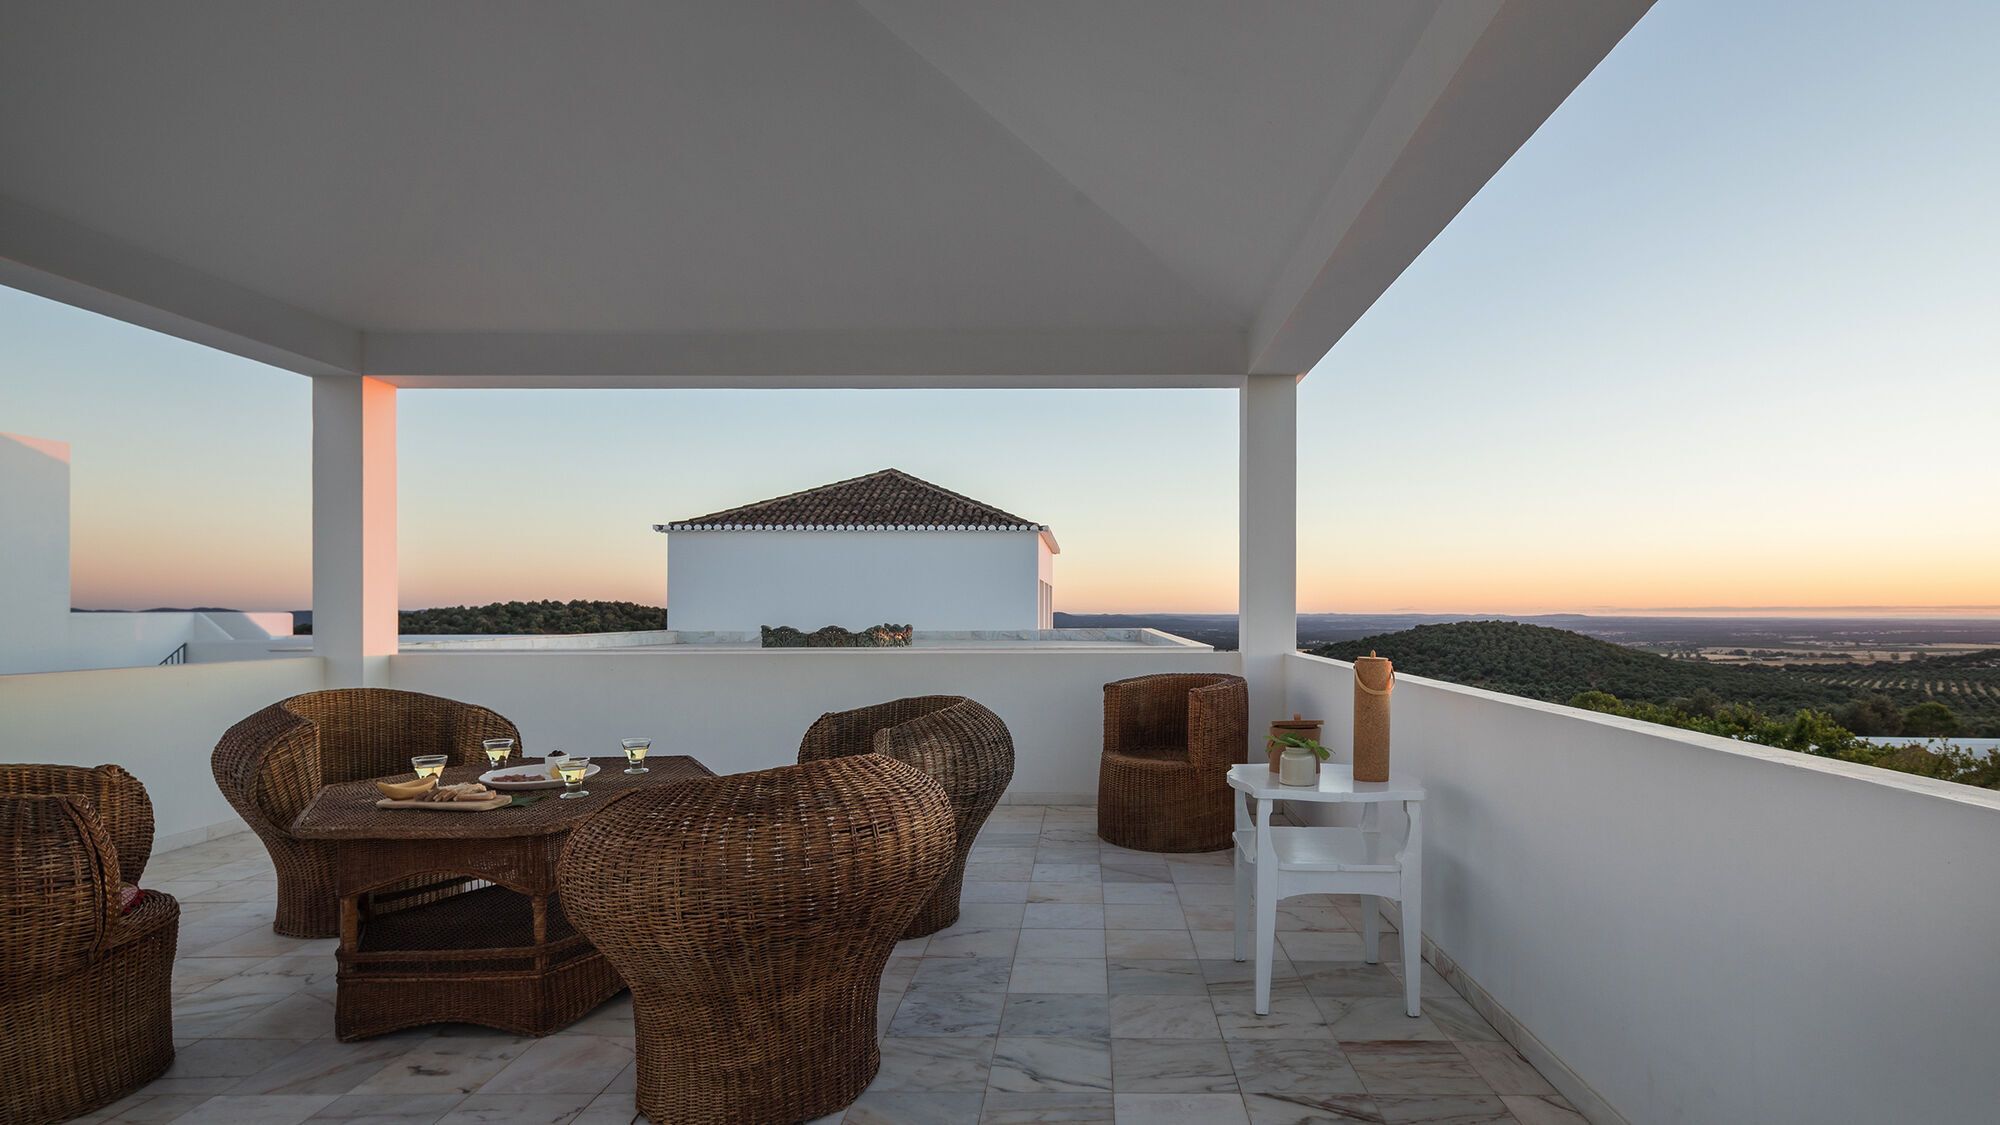 The best hotels in Portugal with an idealistic daily picture in front of your eyes